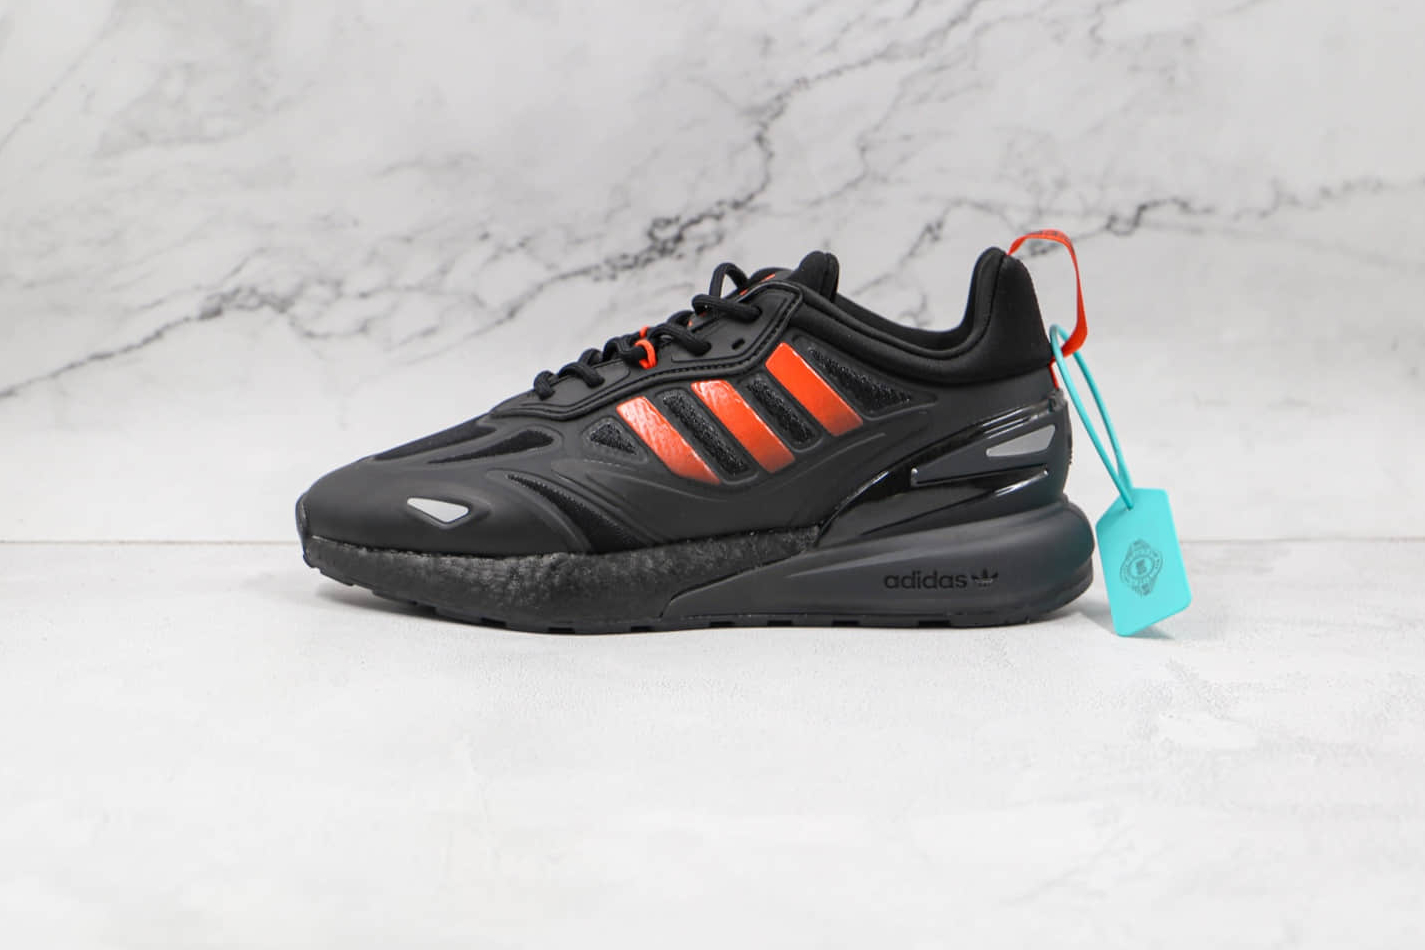 Adidas ZX 2K Boost 2.0 Black Solar Red: Shop the Latest Adidas Sneakers